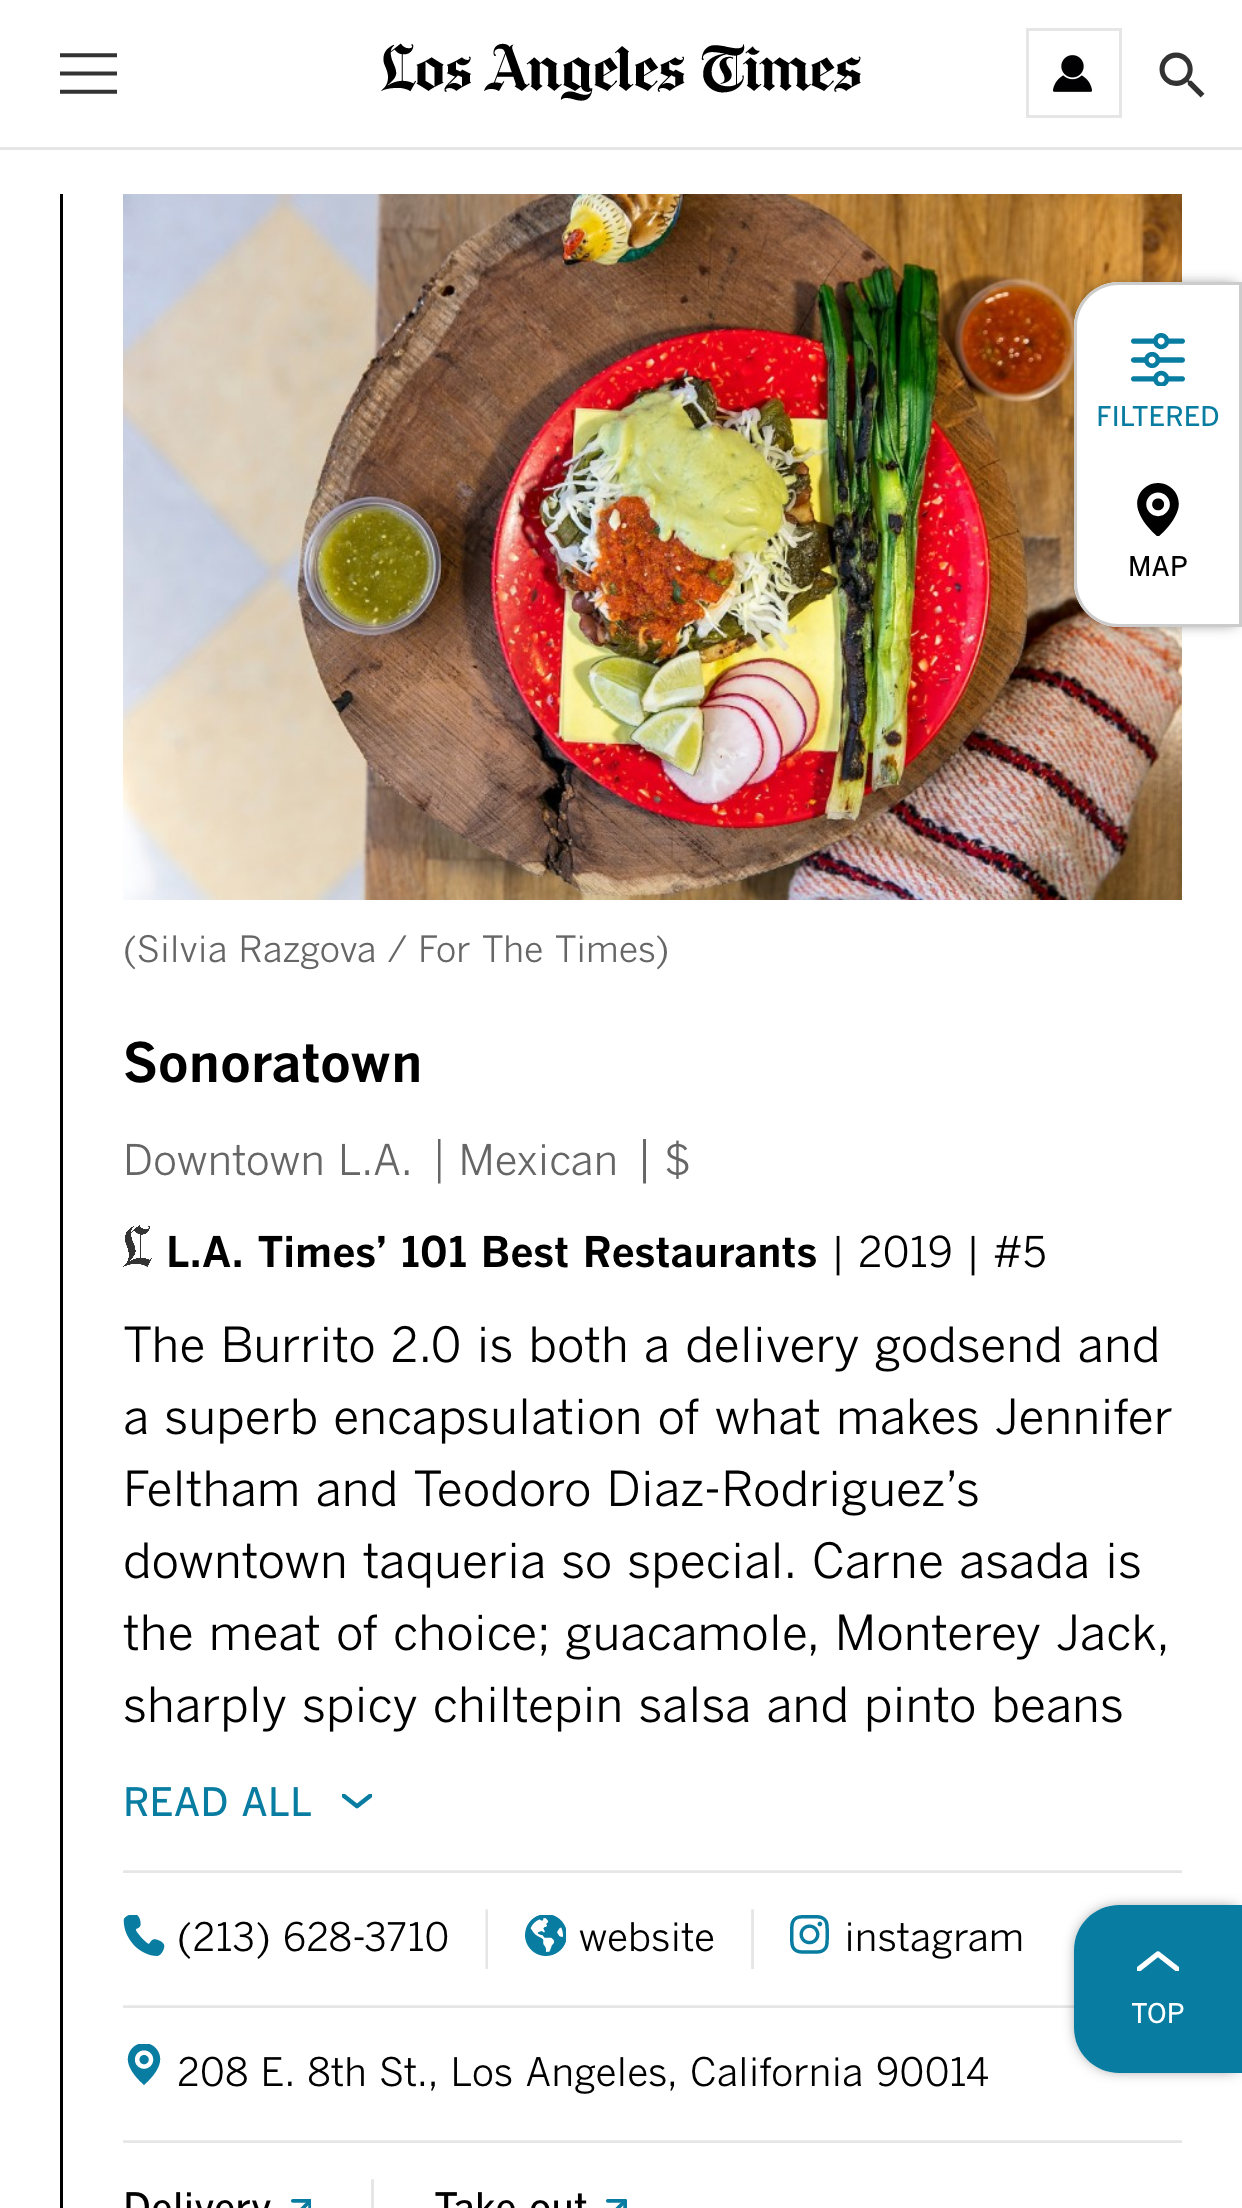 A screenshot of an L.A. Times POI List featuring the restaurant Sonoratown.